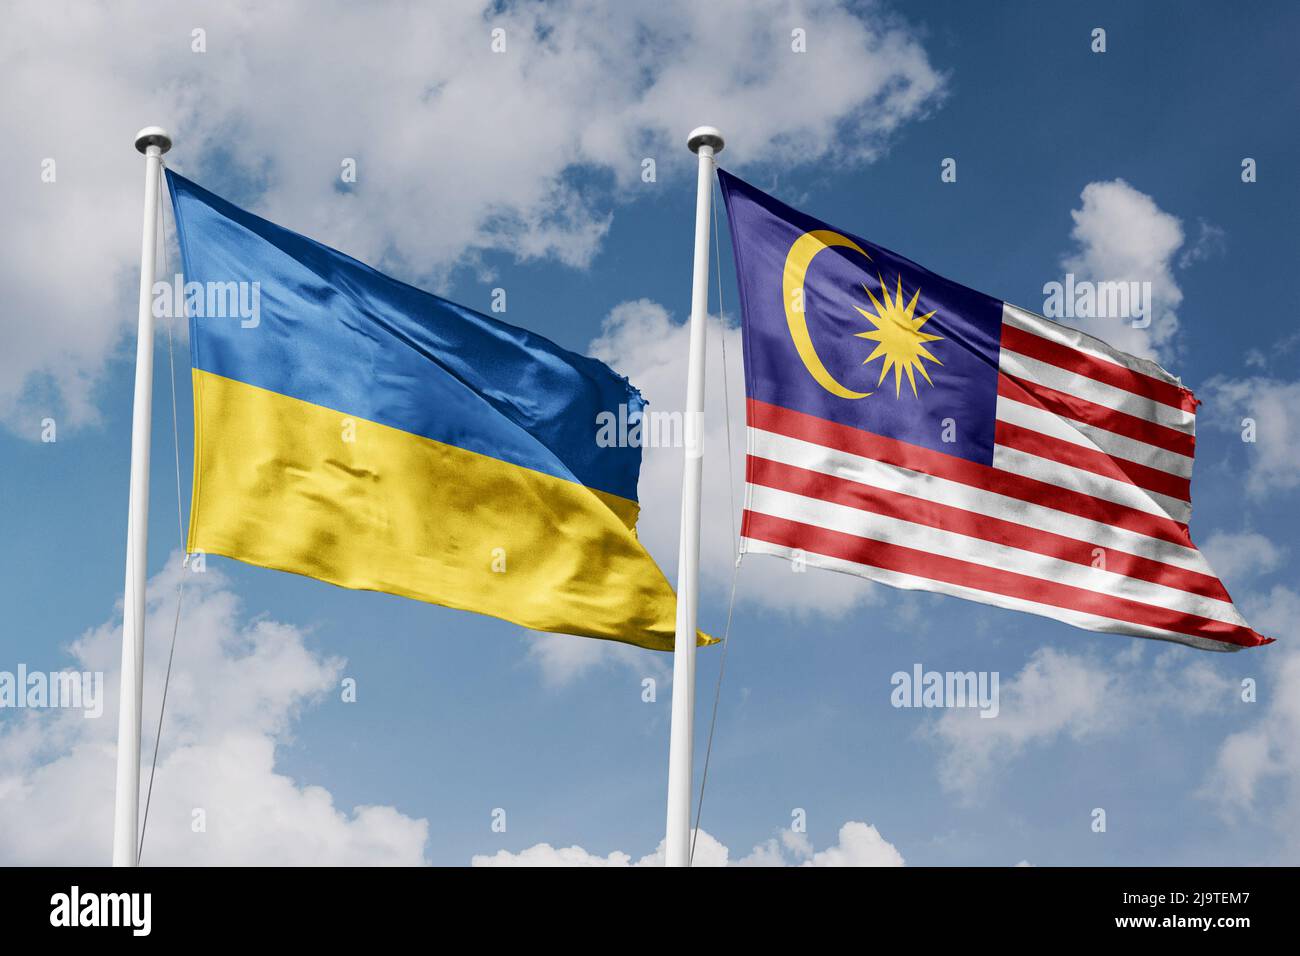 Ukraine and Malaysia two flags on flagpoles and blue cloudy sky background Stock Photo